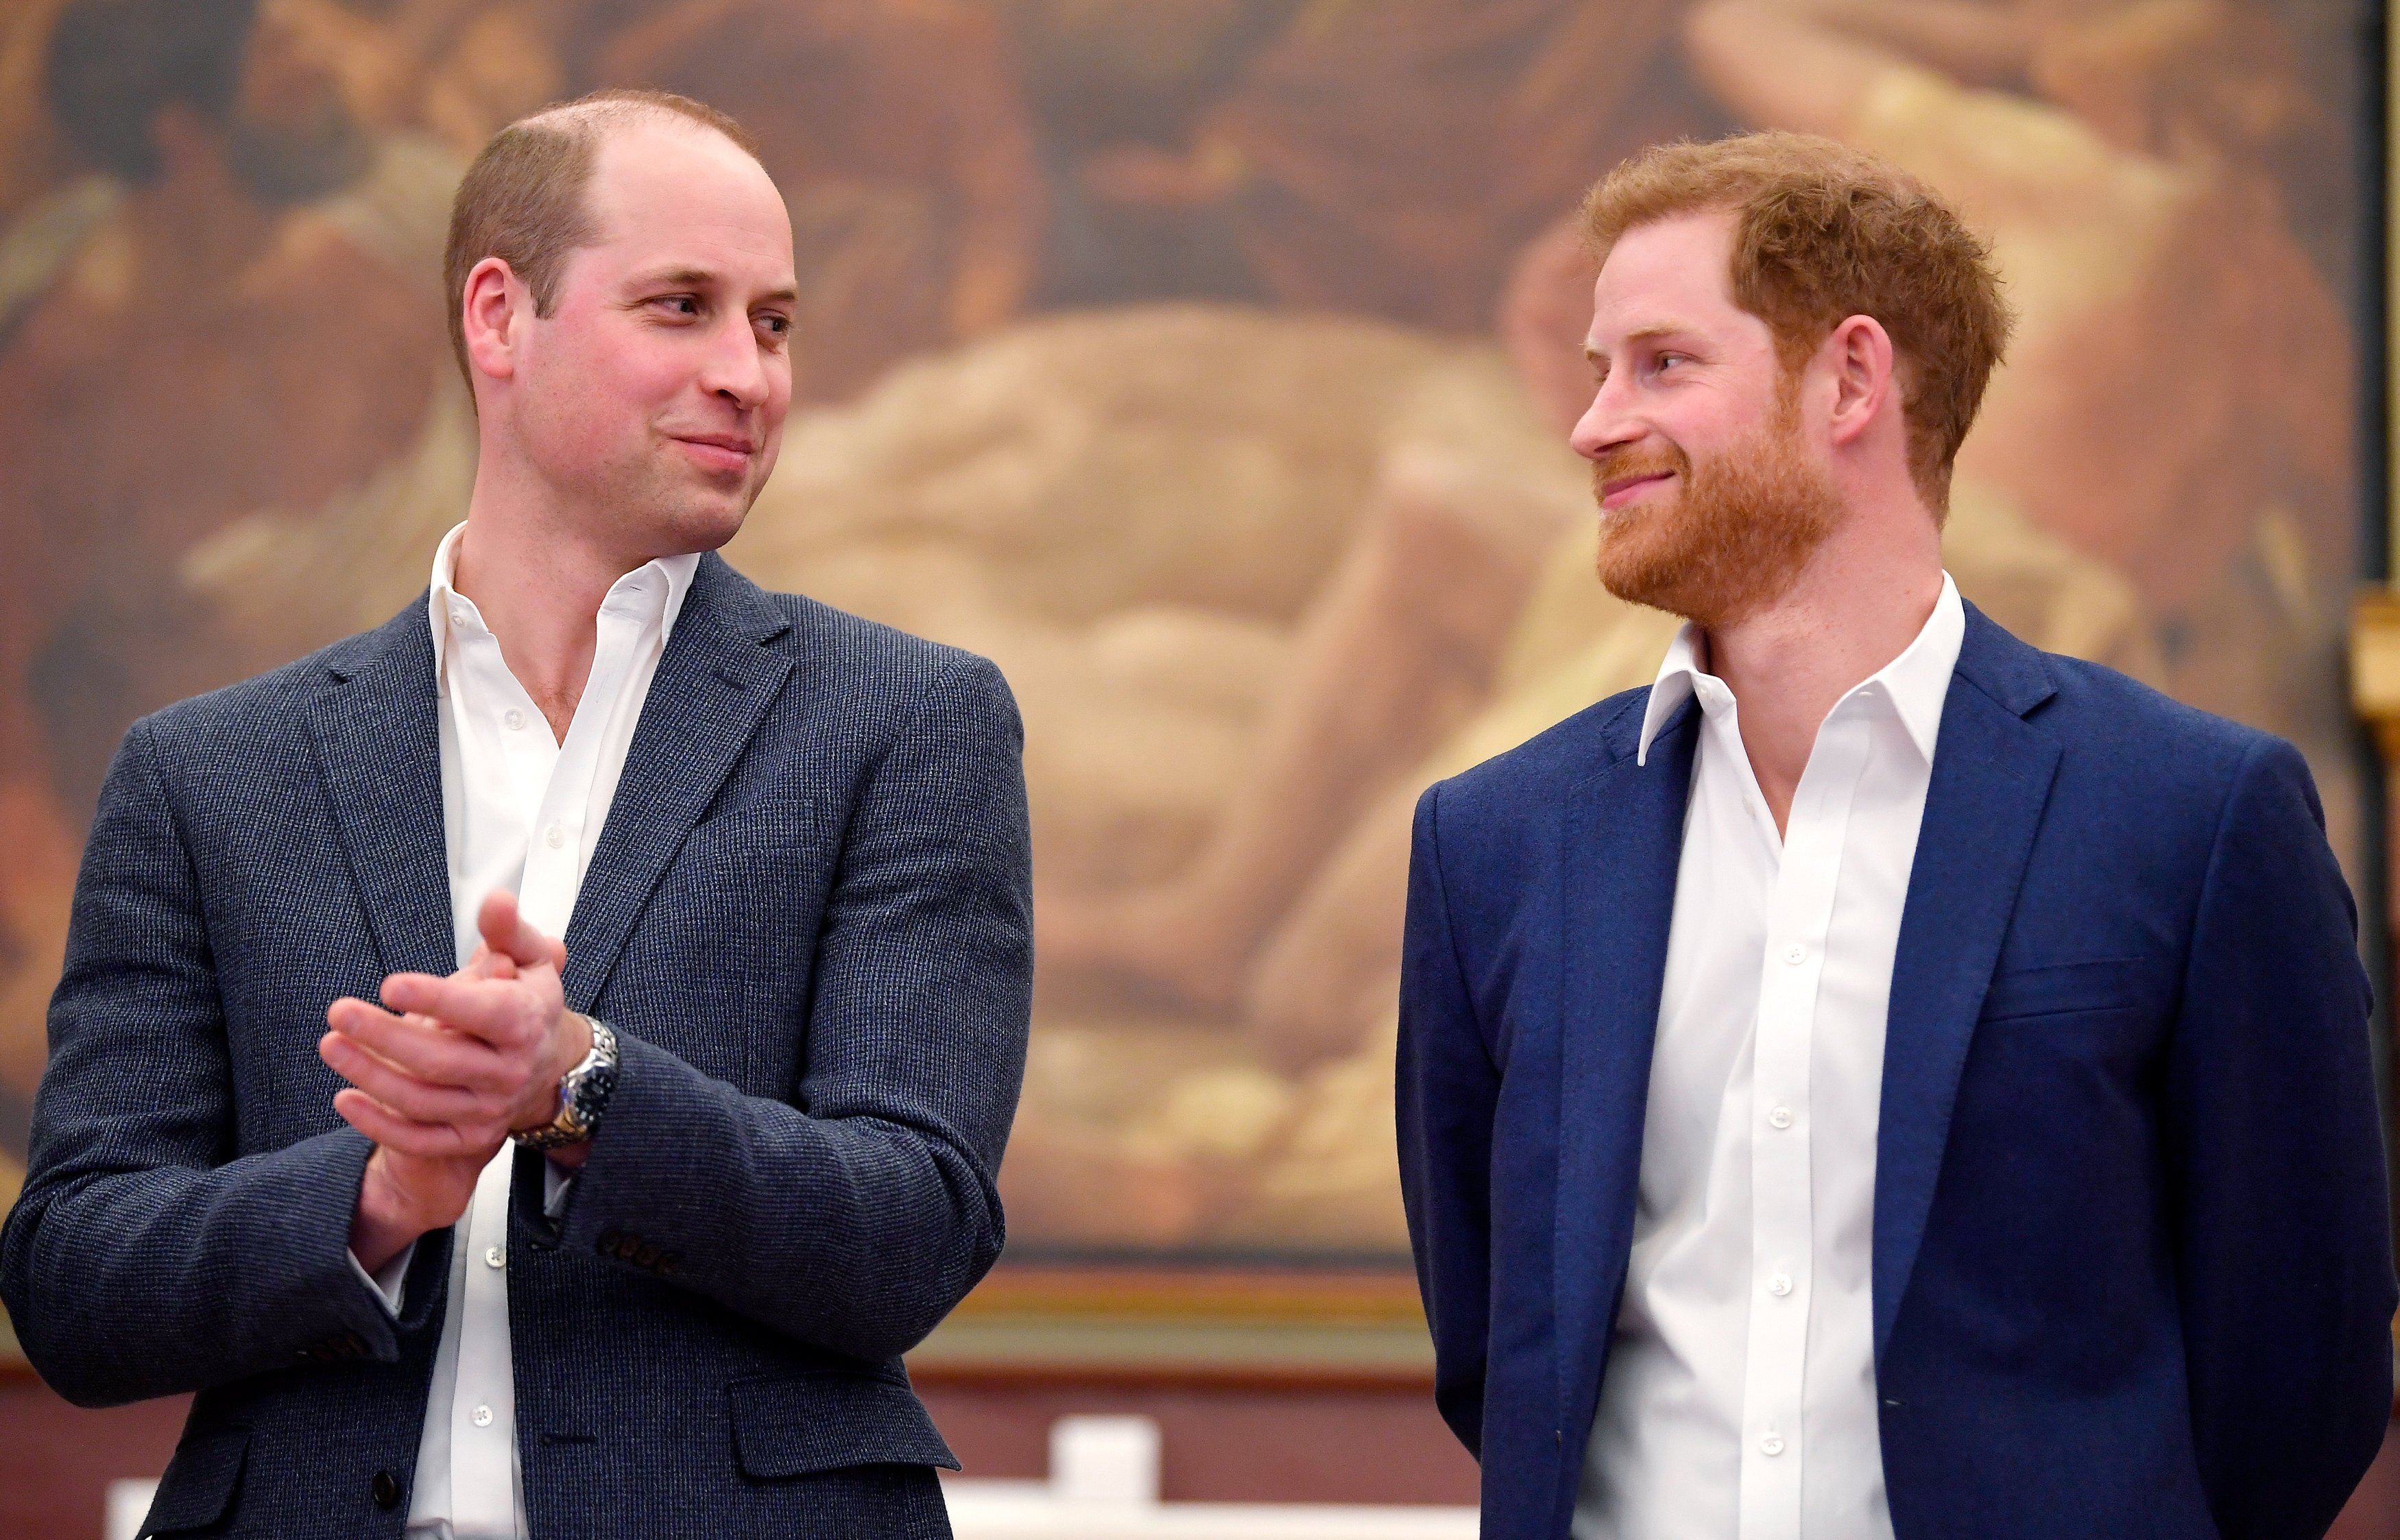 Prince William and Prince Harry during the opening of the Greenhouse Sports Centre on April 26, 2018 in London, United Kingdom. / Source: Getty Images